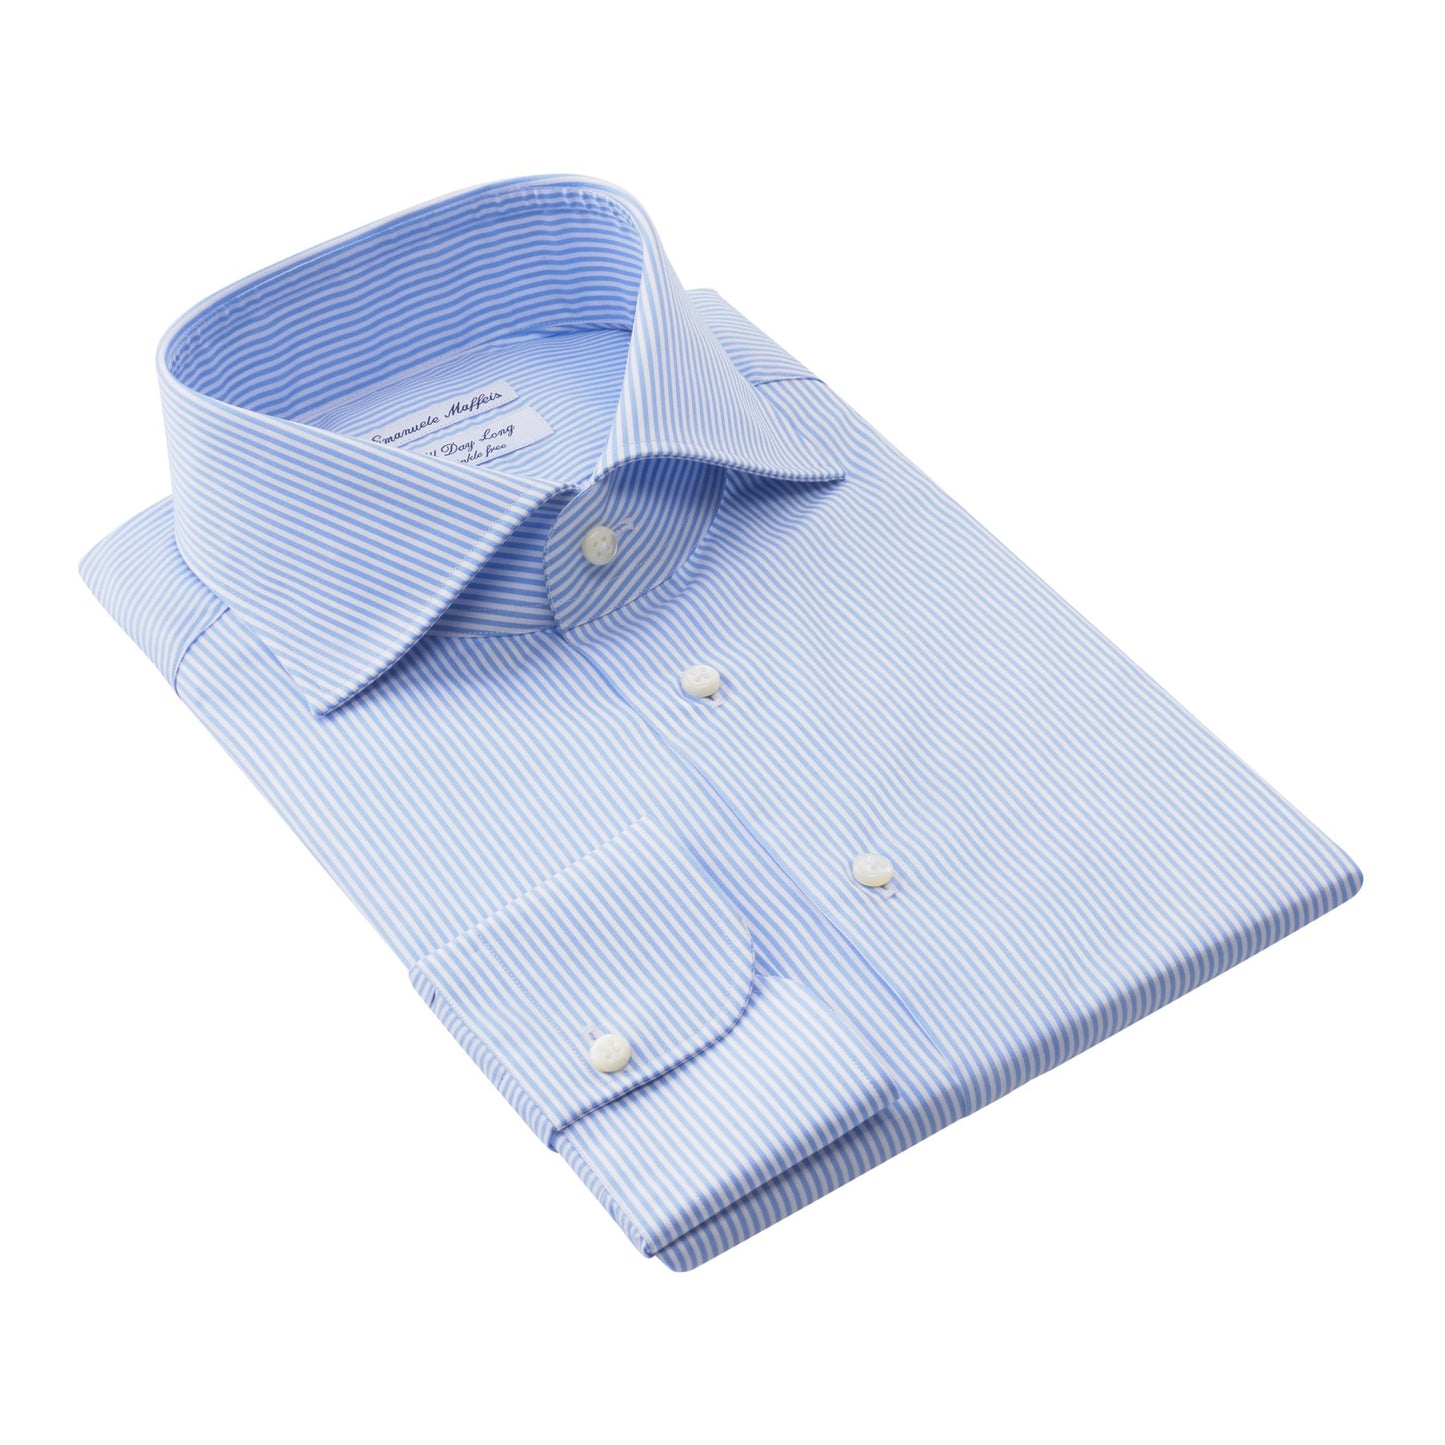 Emanuele Maffeis "All Day Long Collection" Bengal-Stripe Cotton Light Blue Shirt with Cutaway Collar - SARTALE